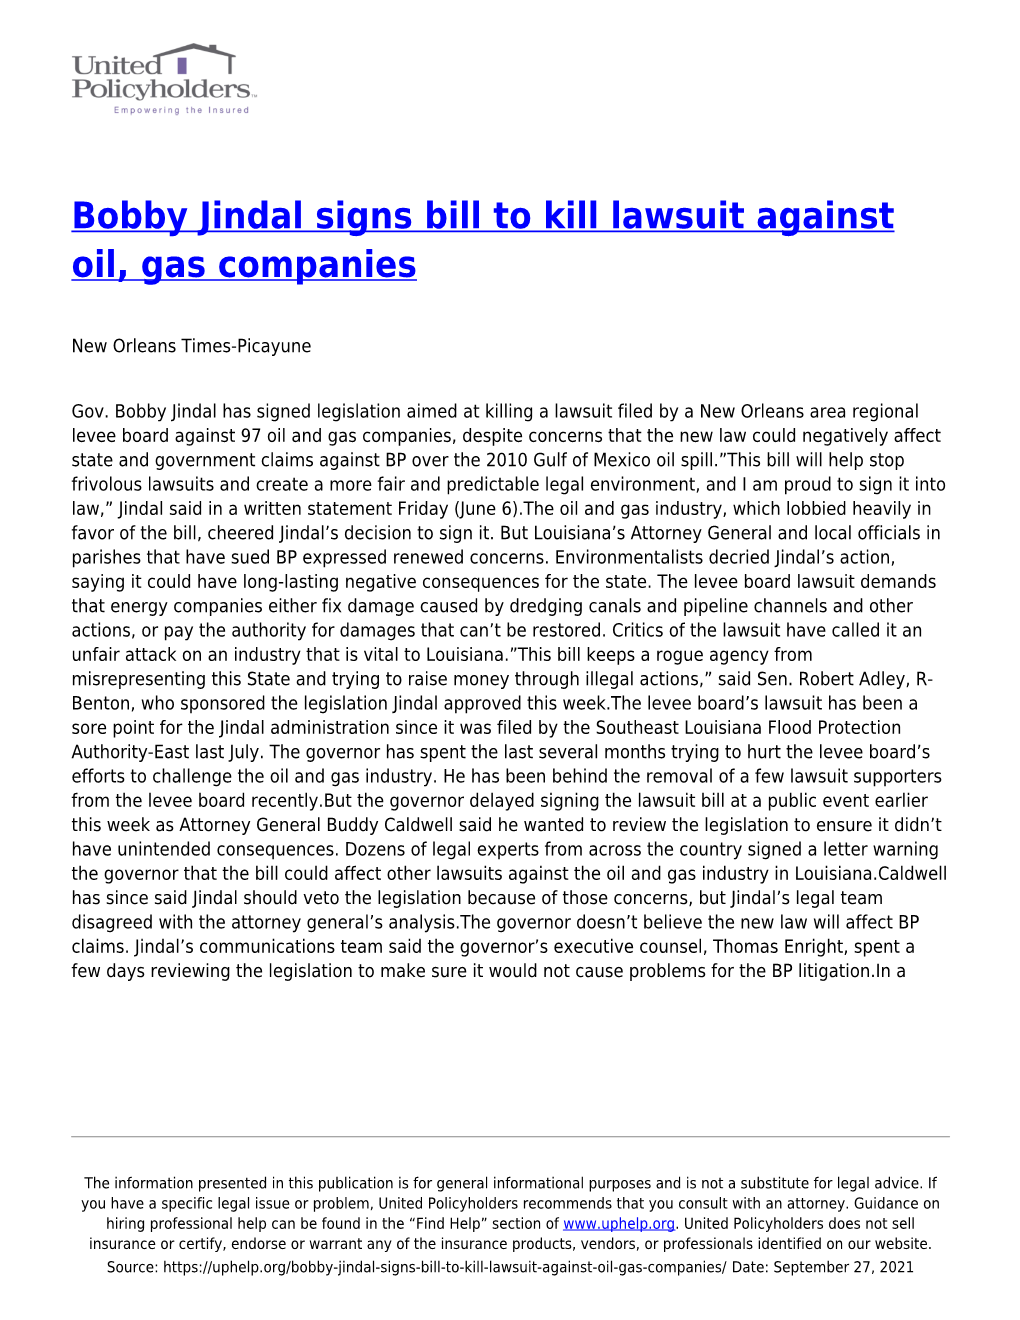 Bobby Jindal Signs Bill to Kill Lawsuit Against Oil, Gas Companies